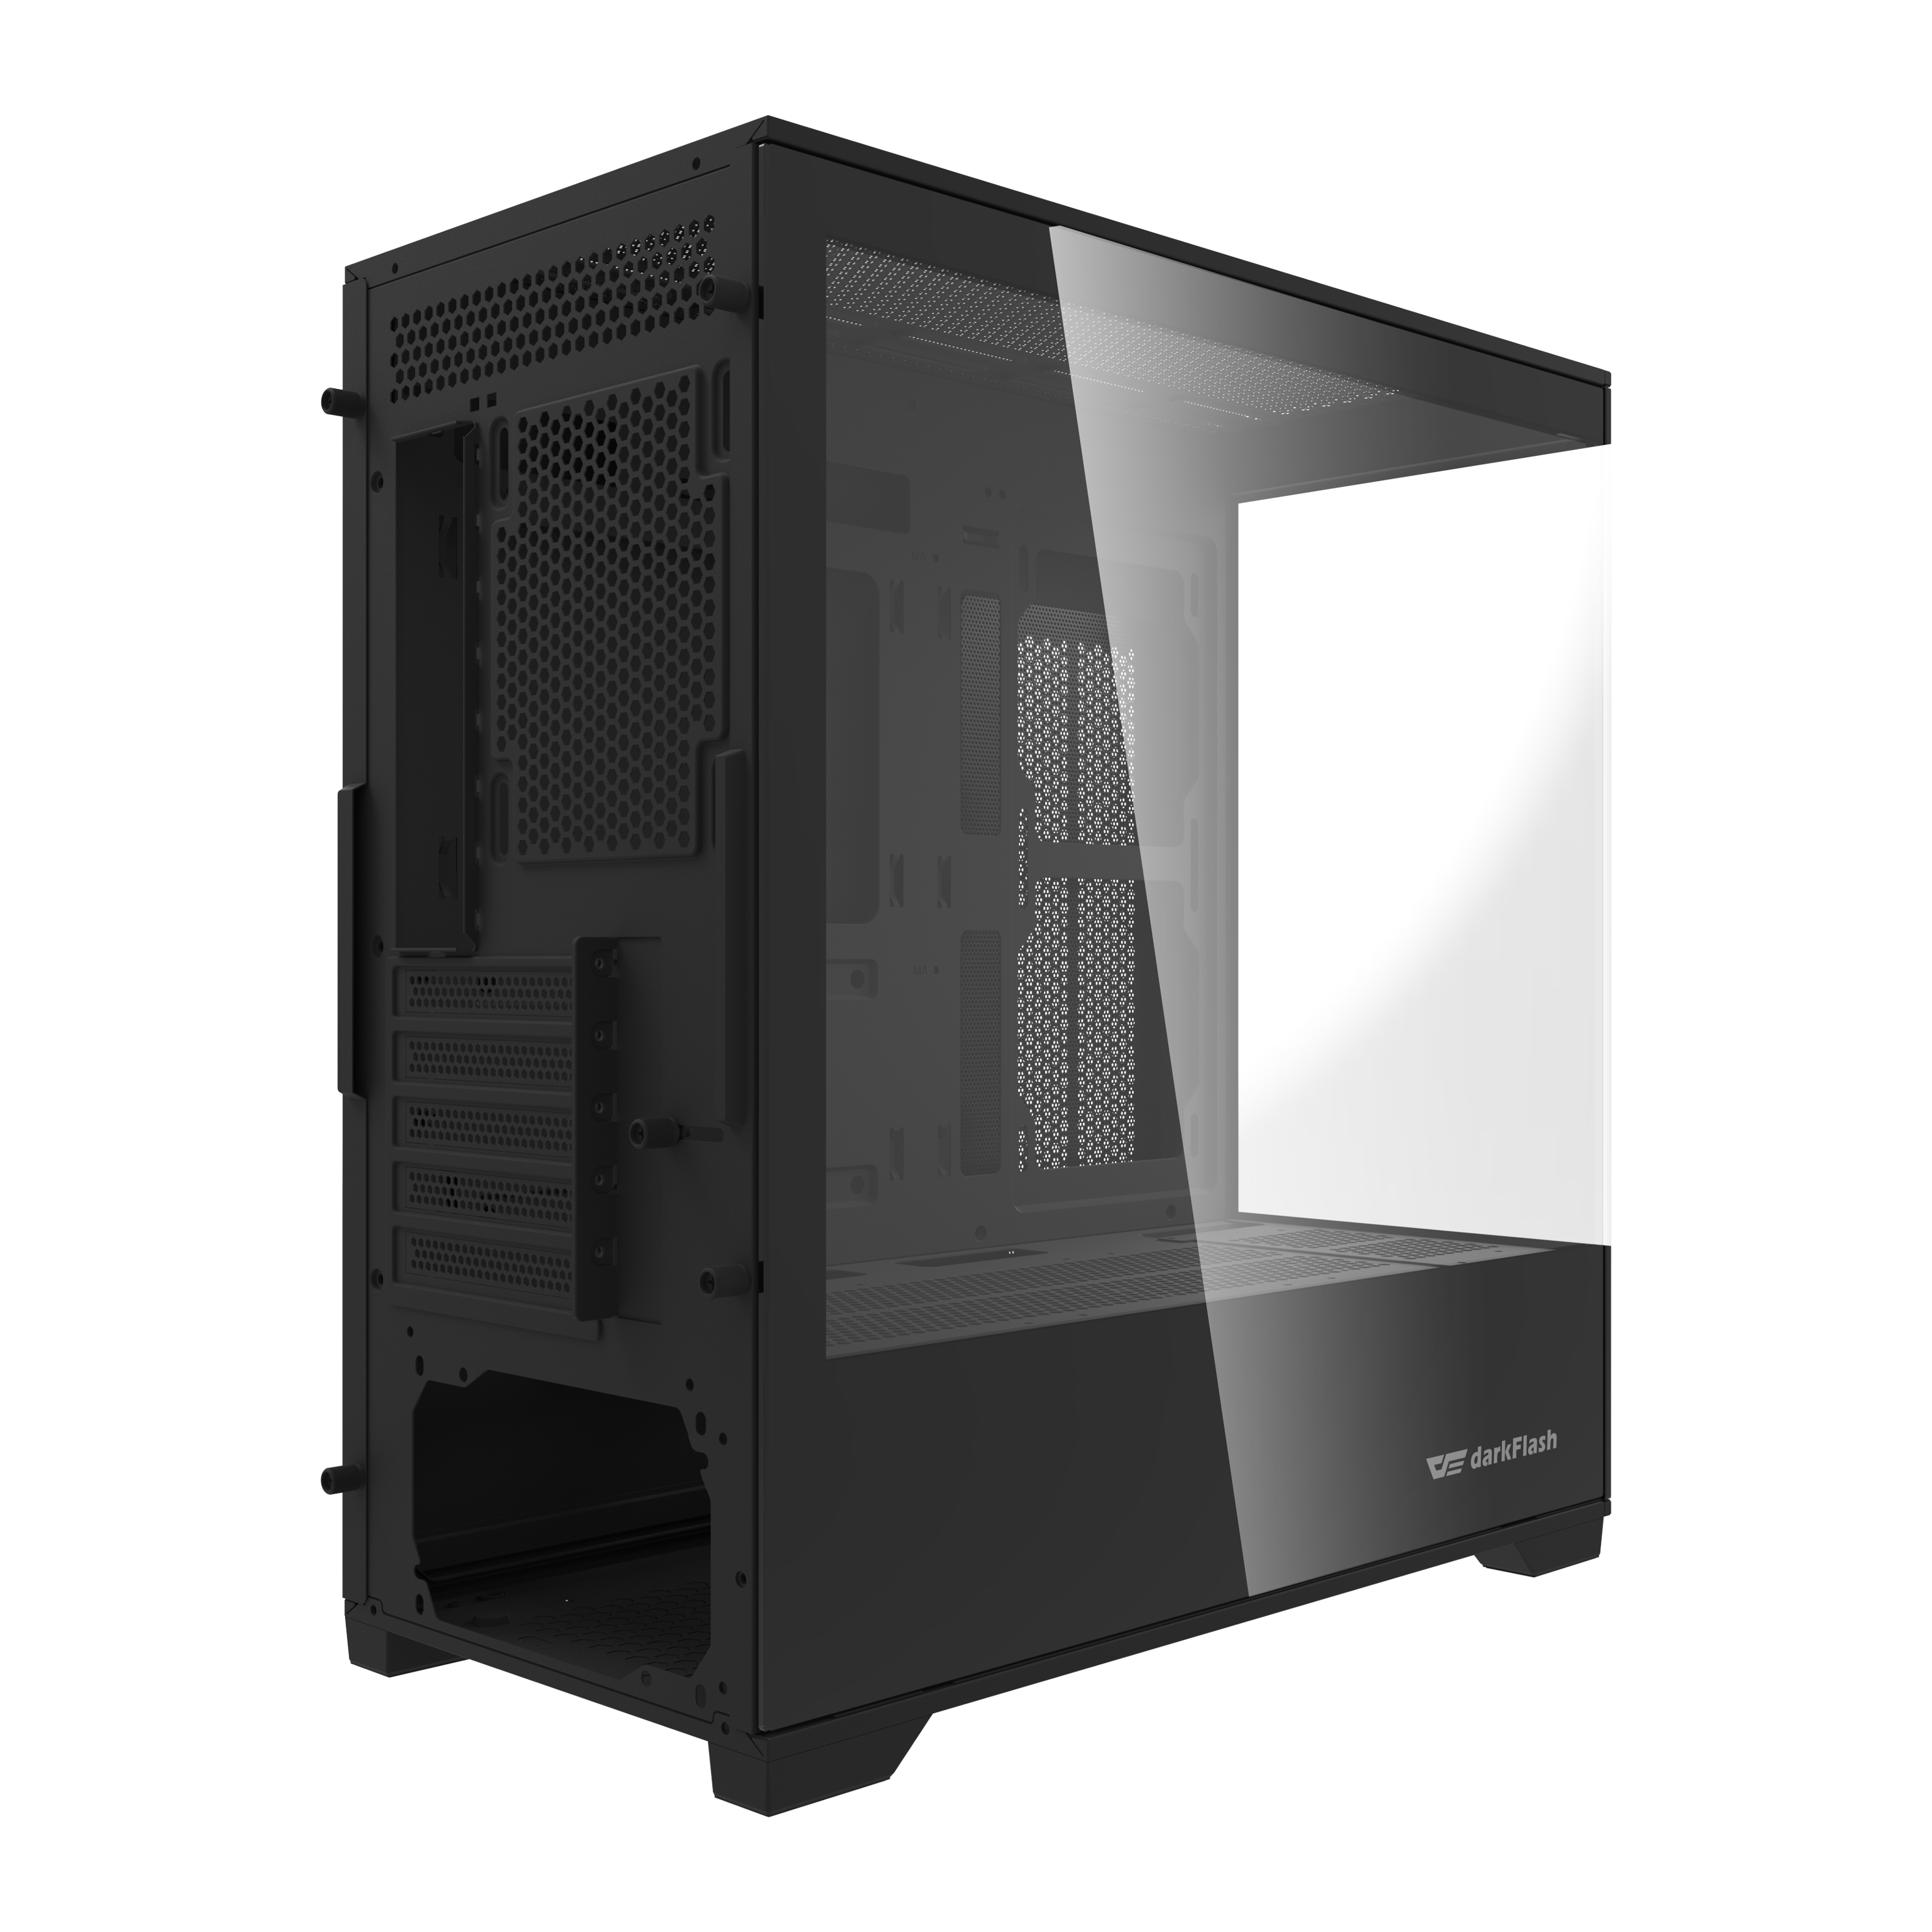 DarkFlash Computer PC Case Micro-ATX Gaming Tower without Fan (DK415P)